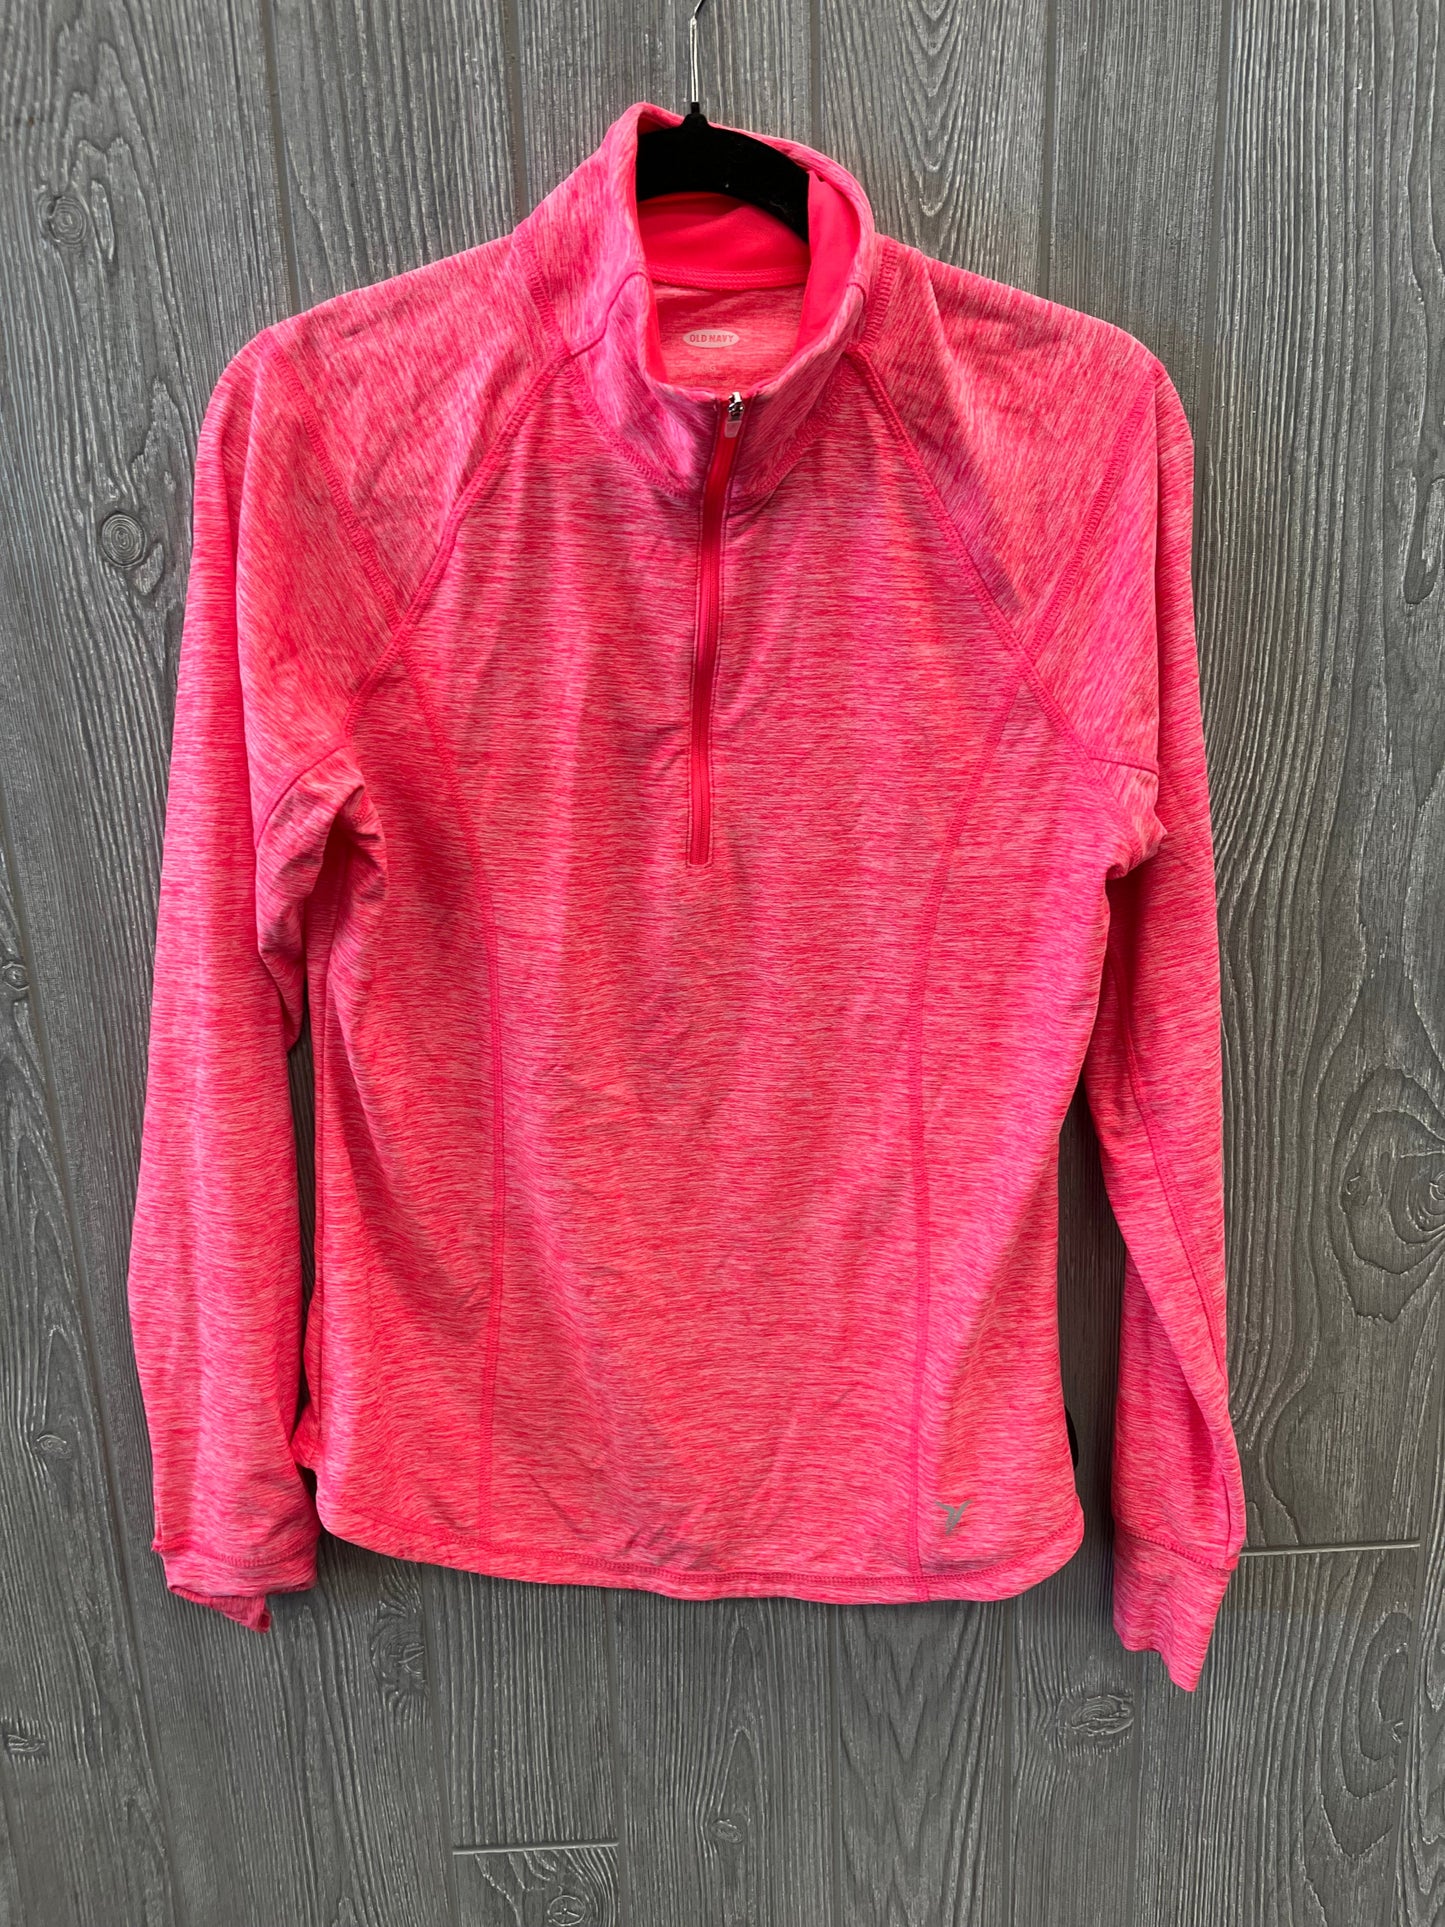 Athletic Top Long Sleeve Crewneck By Old Navy  Size: L